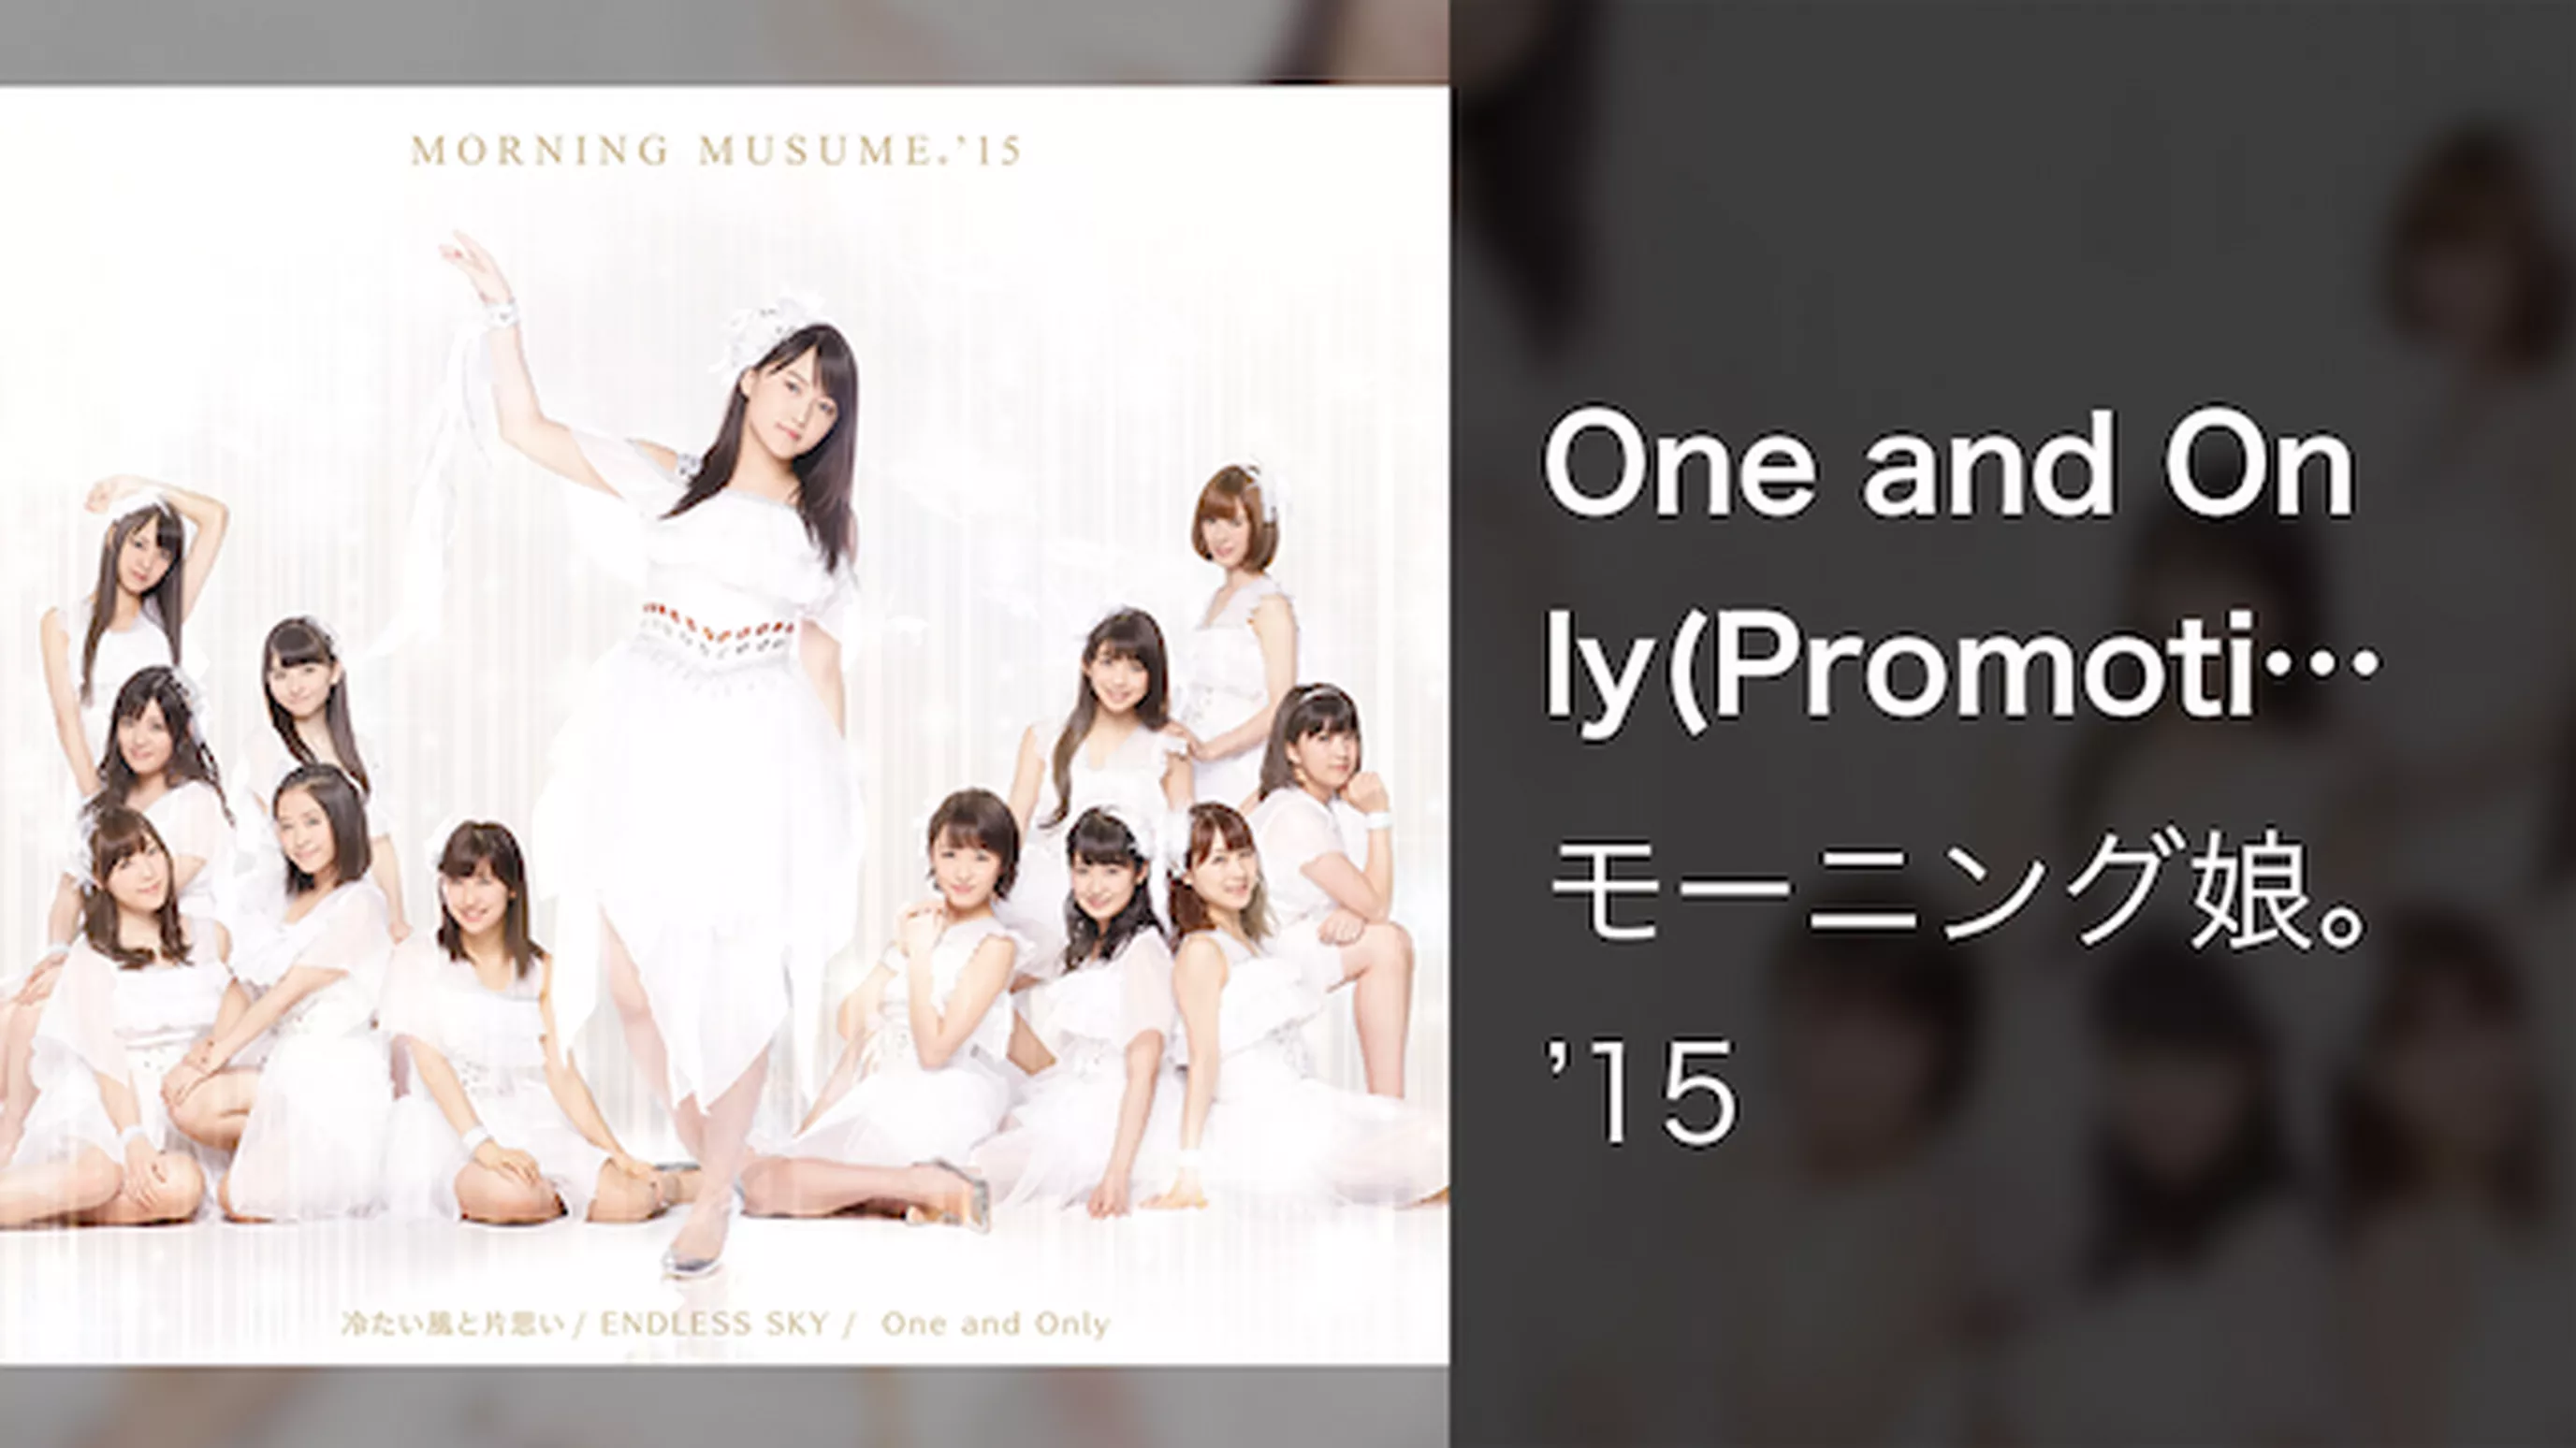 One and Only(Promotion Edit)